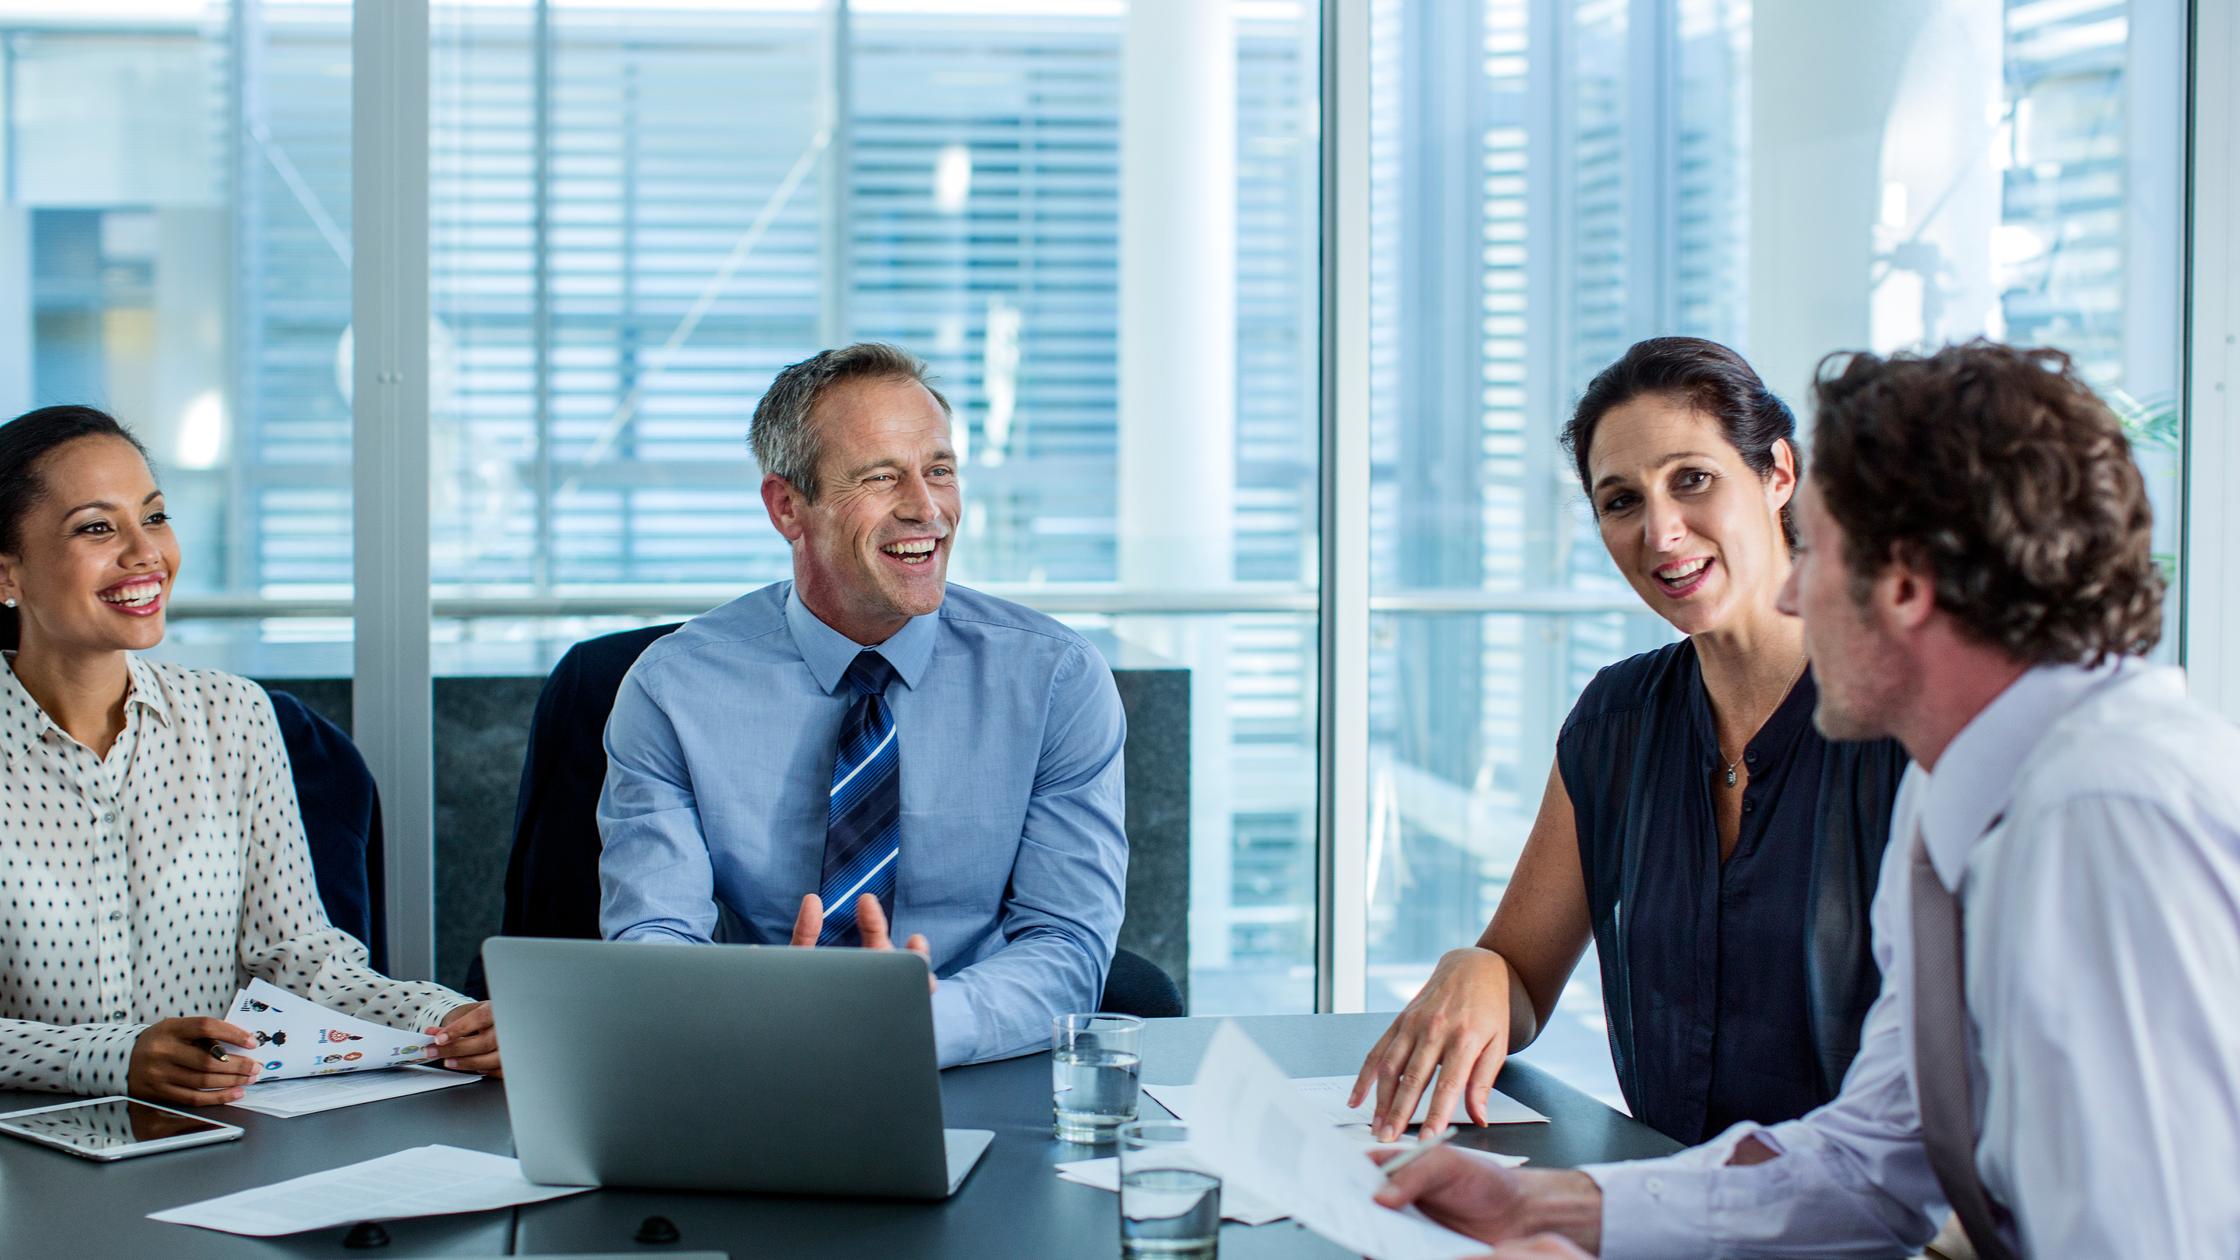 Smiling medical business professionals discussing at conference table in office